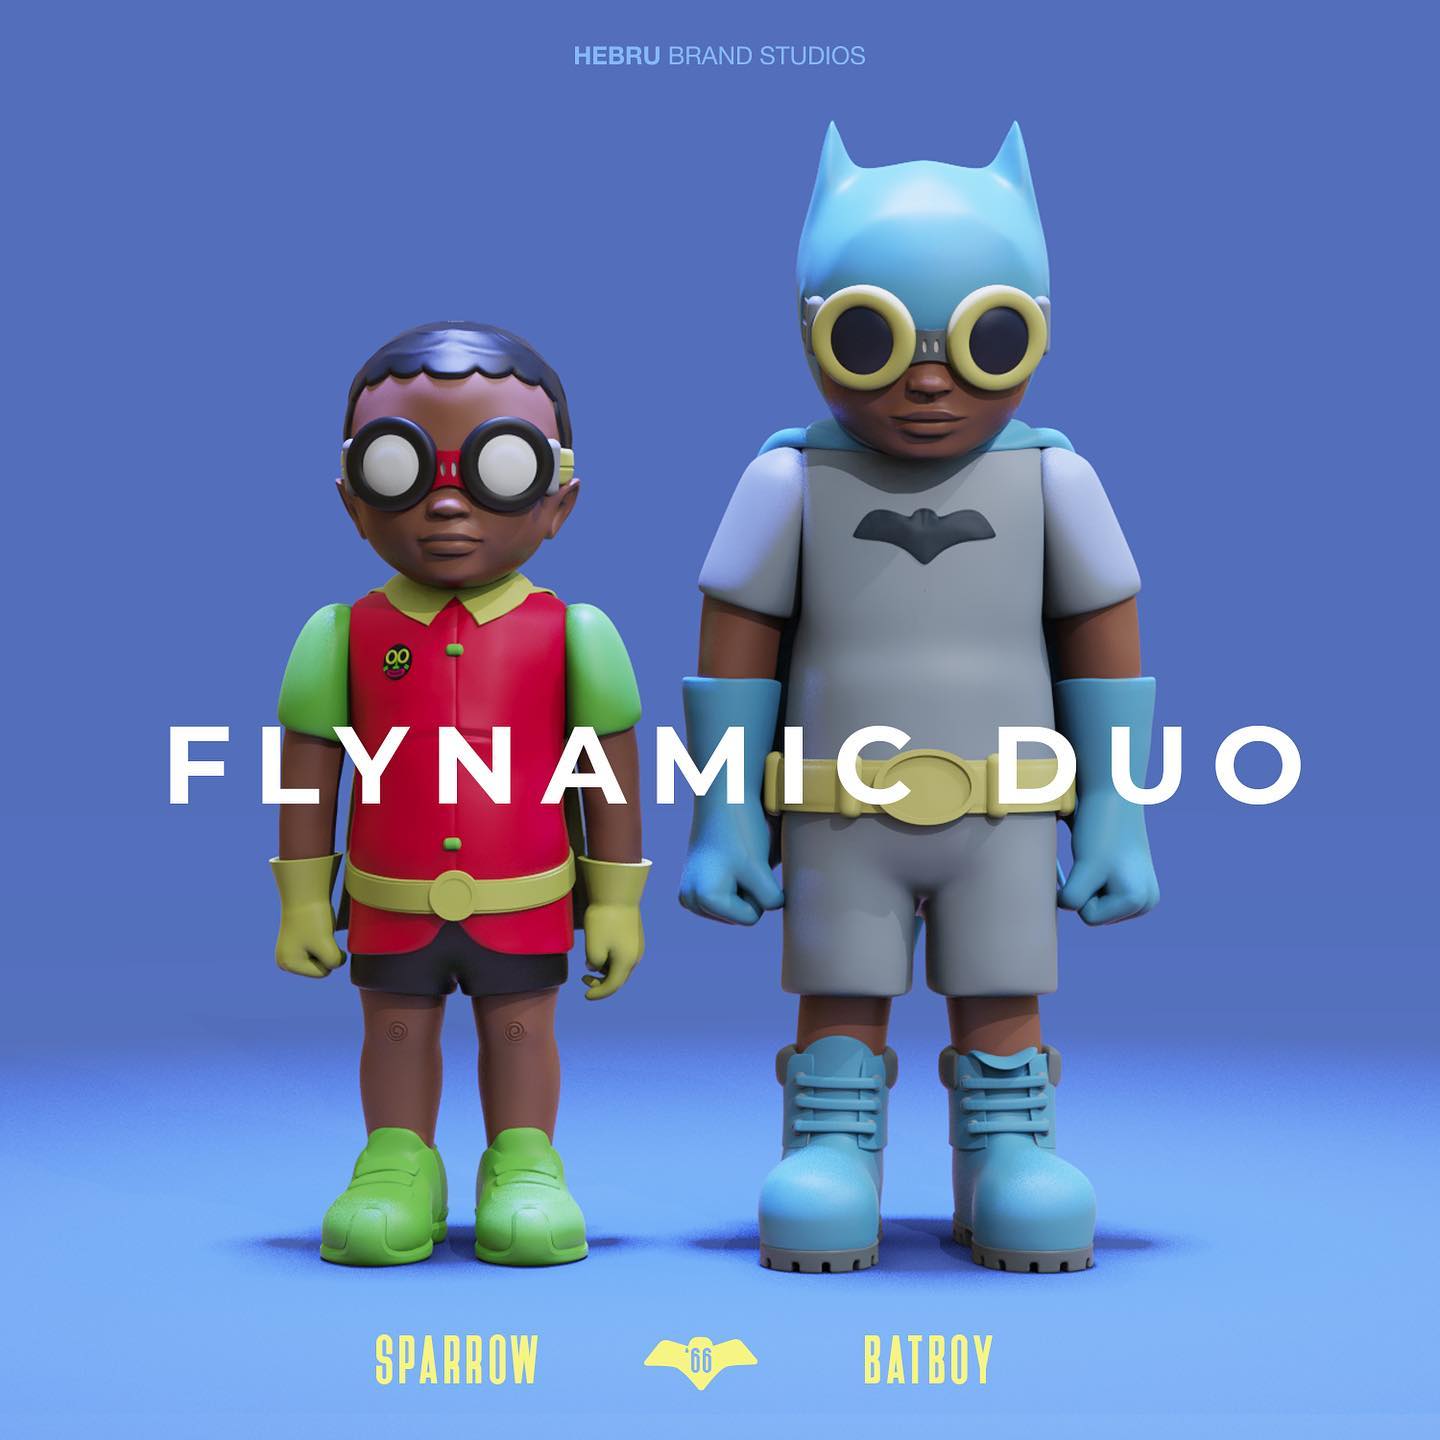 Flynamic Duo 66' & 89' Release with Hebru Brand Studios - The Toy 